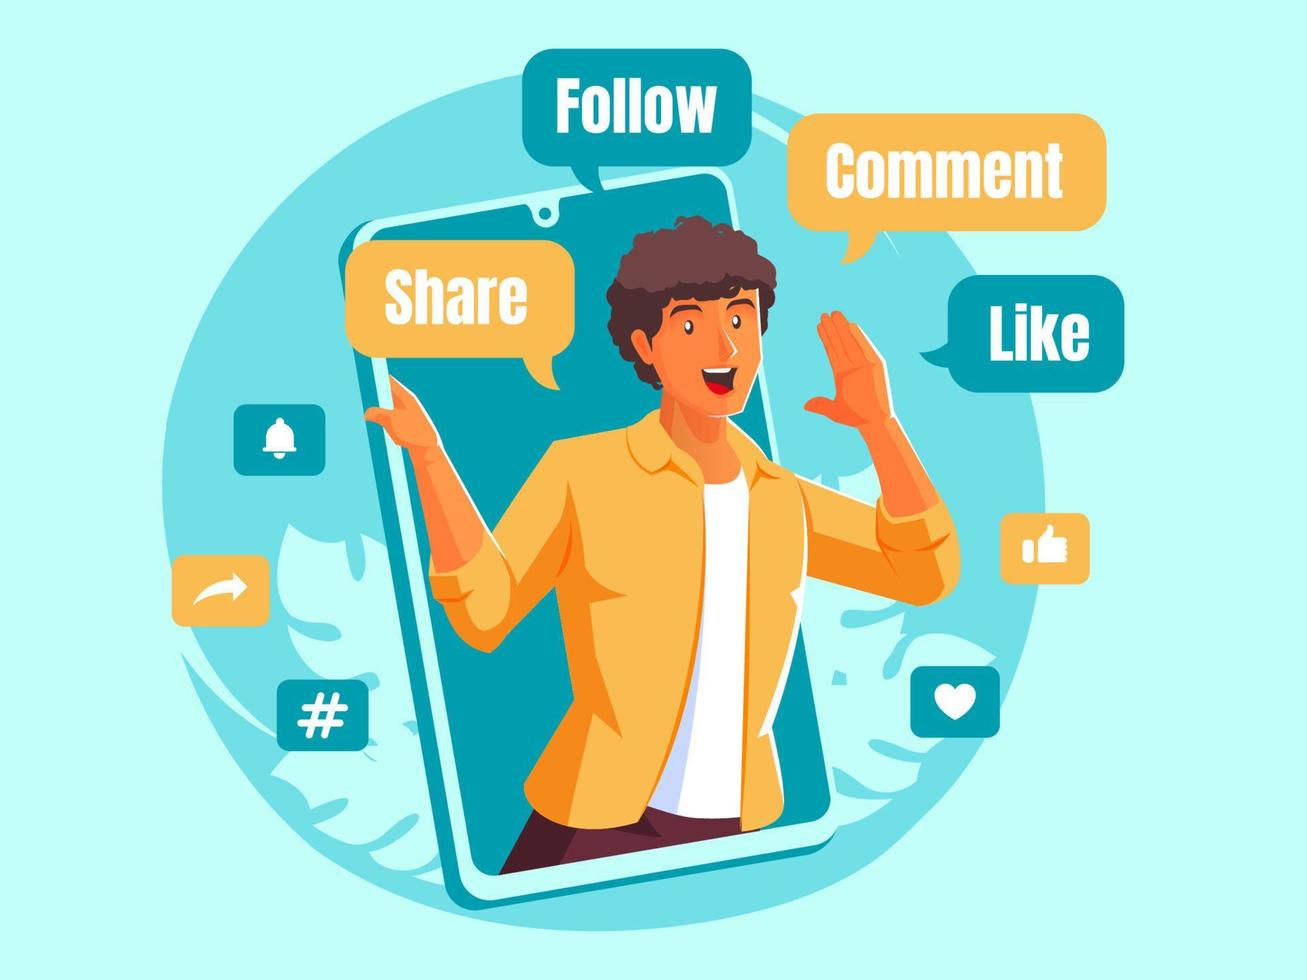 Black men shout promotion social media share follow comment and like vector